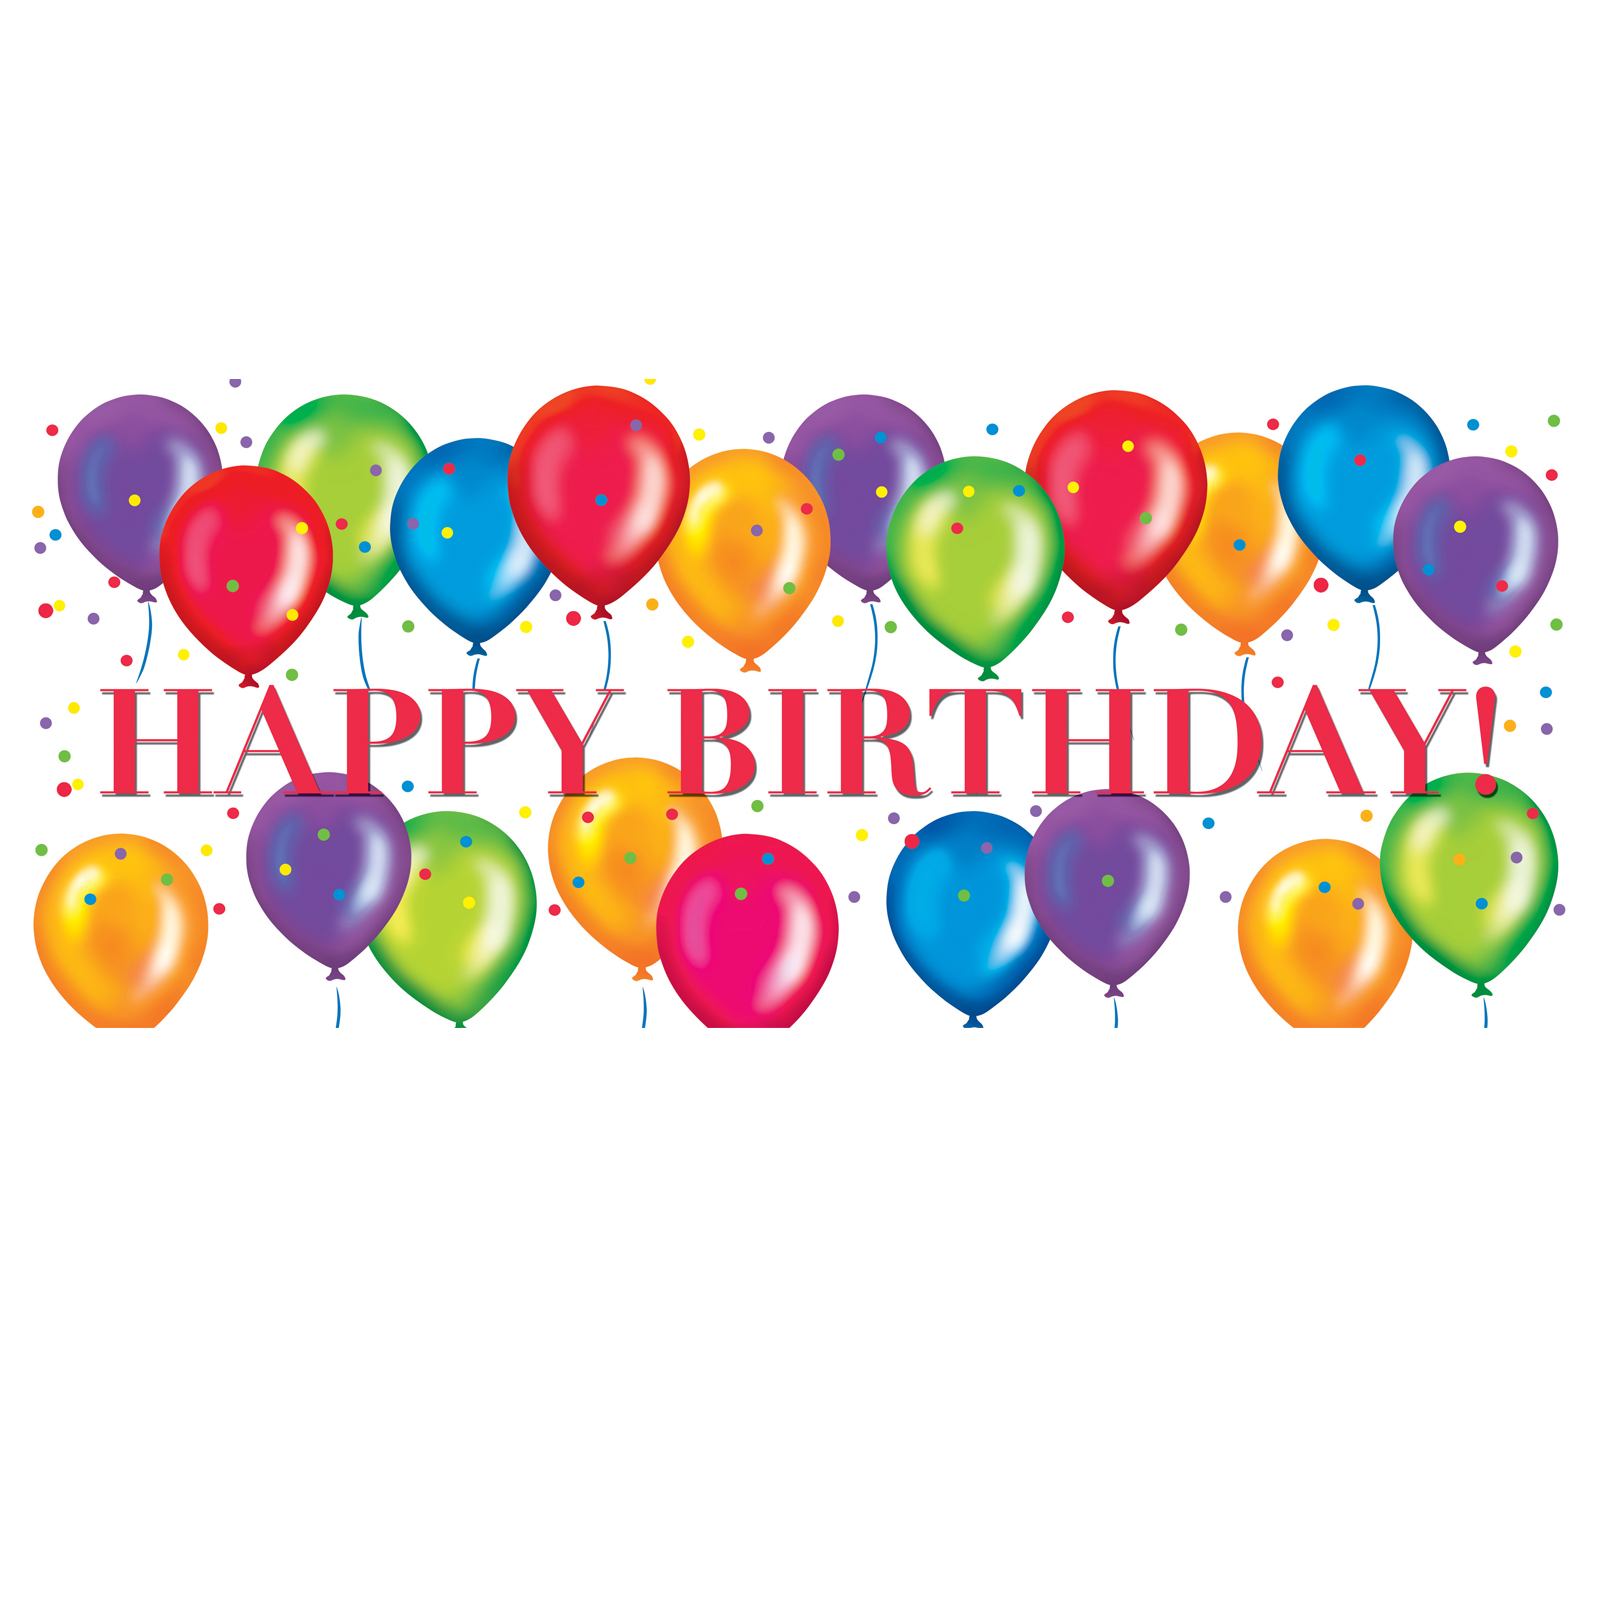 Free clipart images birthday